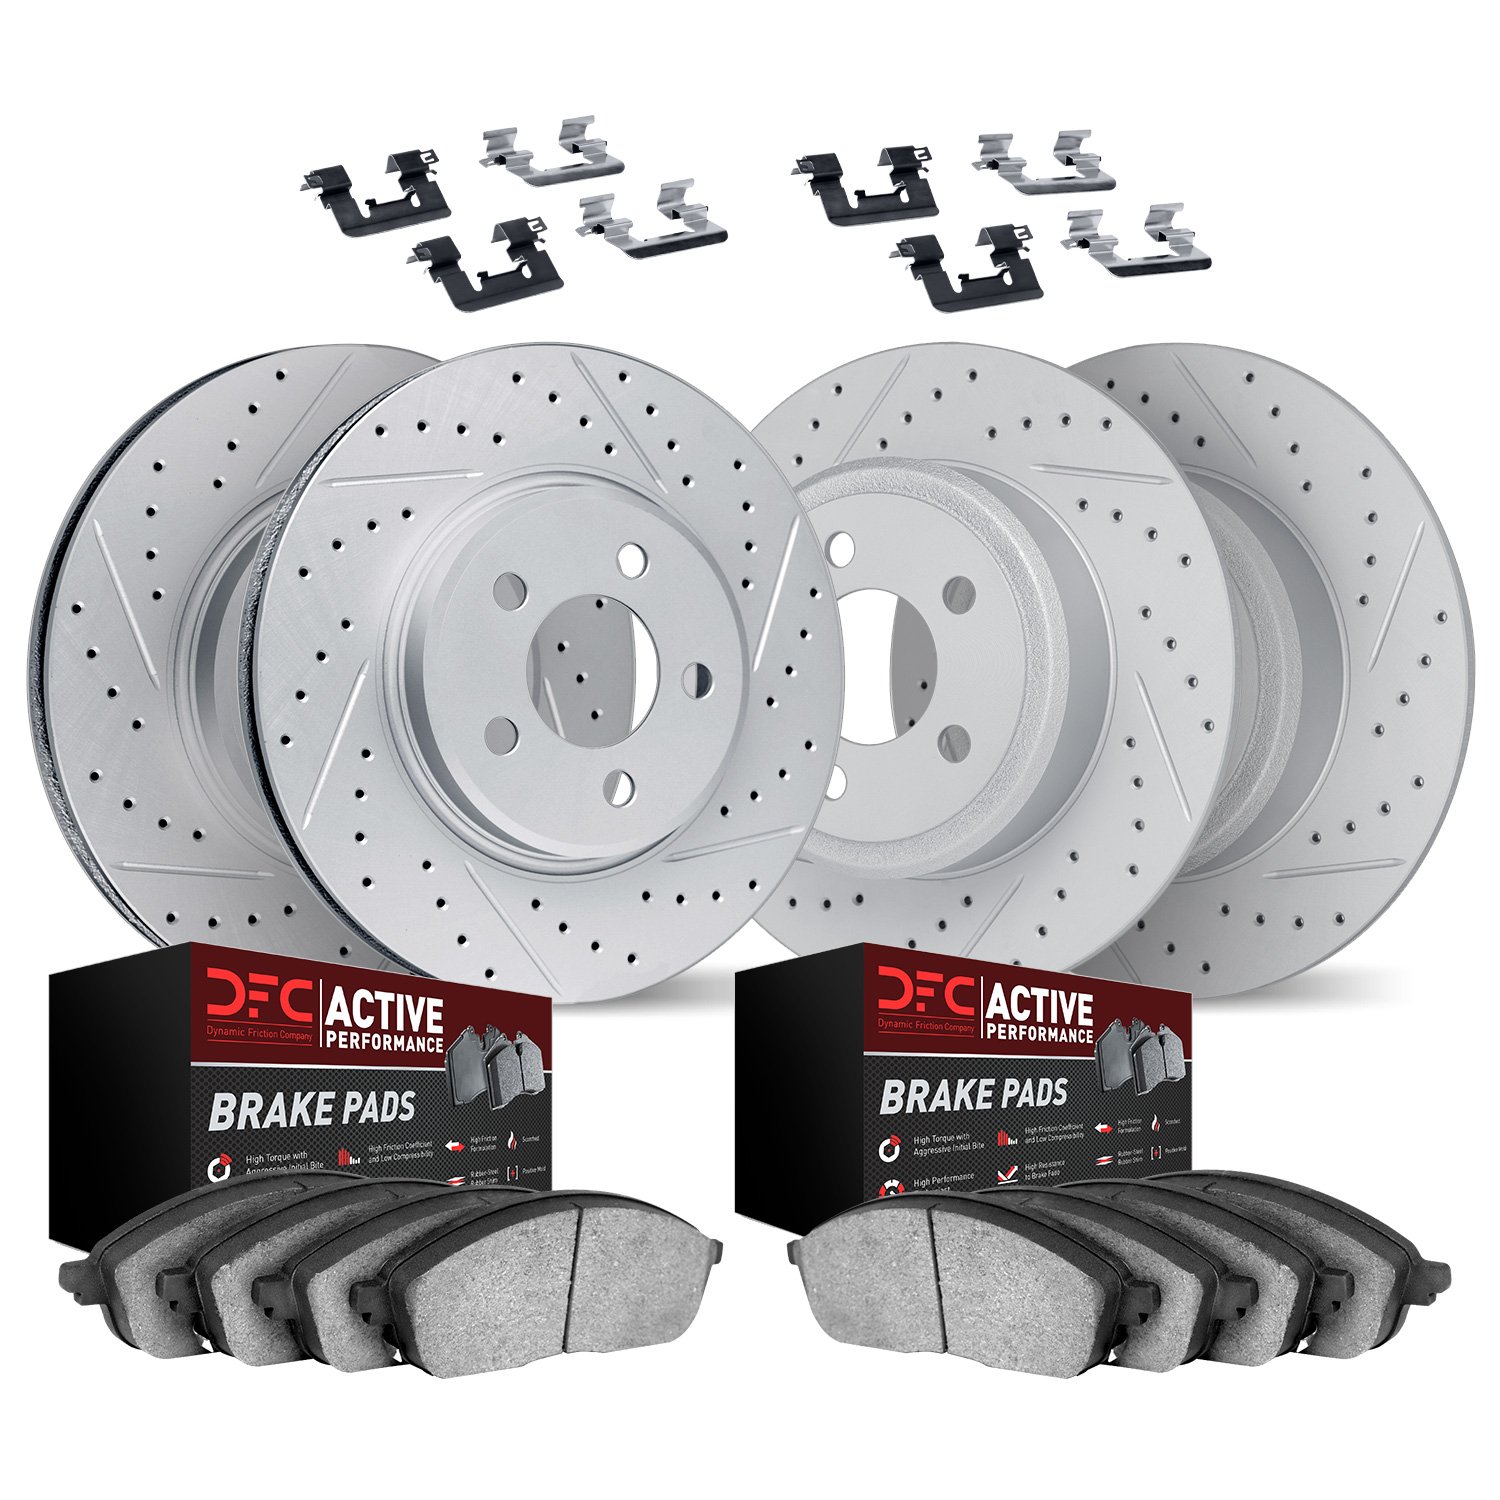 2714-74008 Geoperformance Drilled/Slotted Brake Rotors with Active Performance Pads Kit & Hardware, 2011-2014 Audi/Volkswagen, P